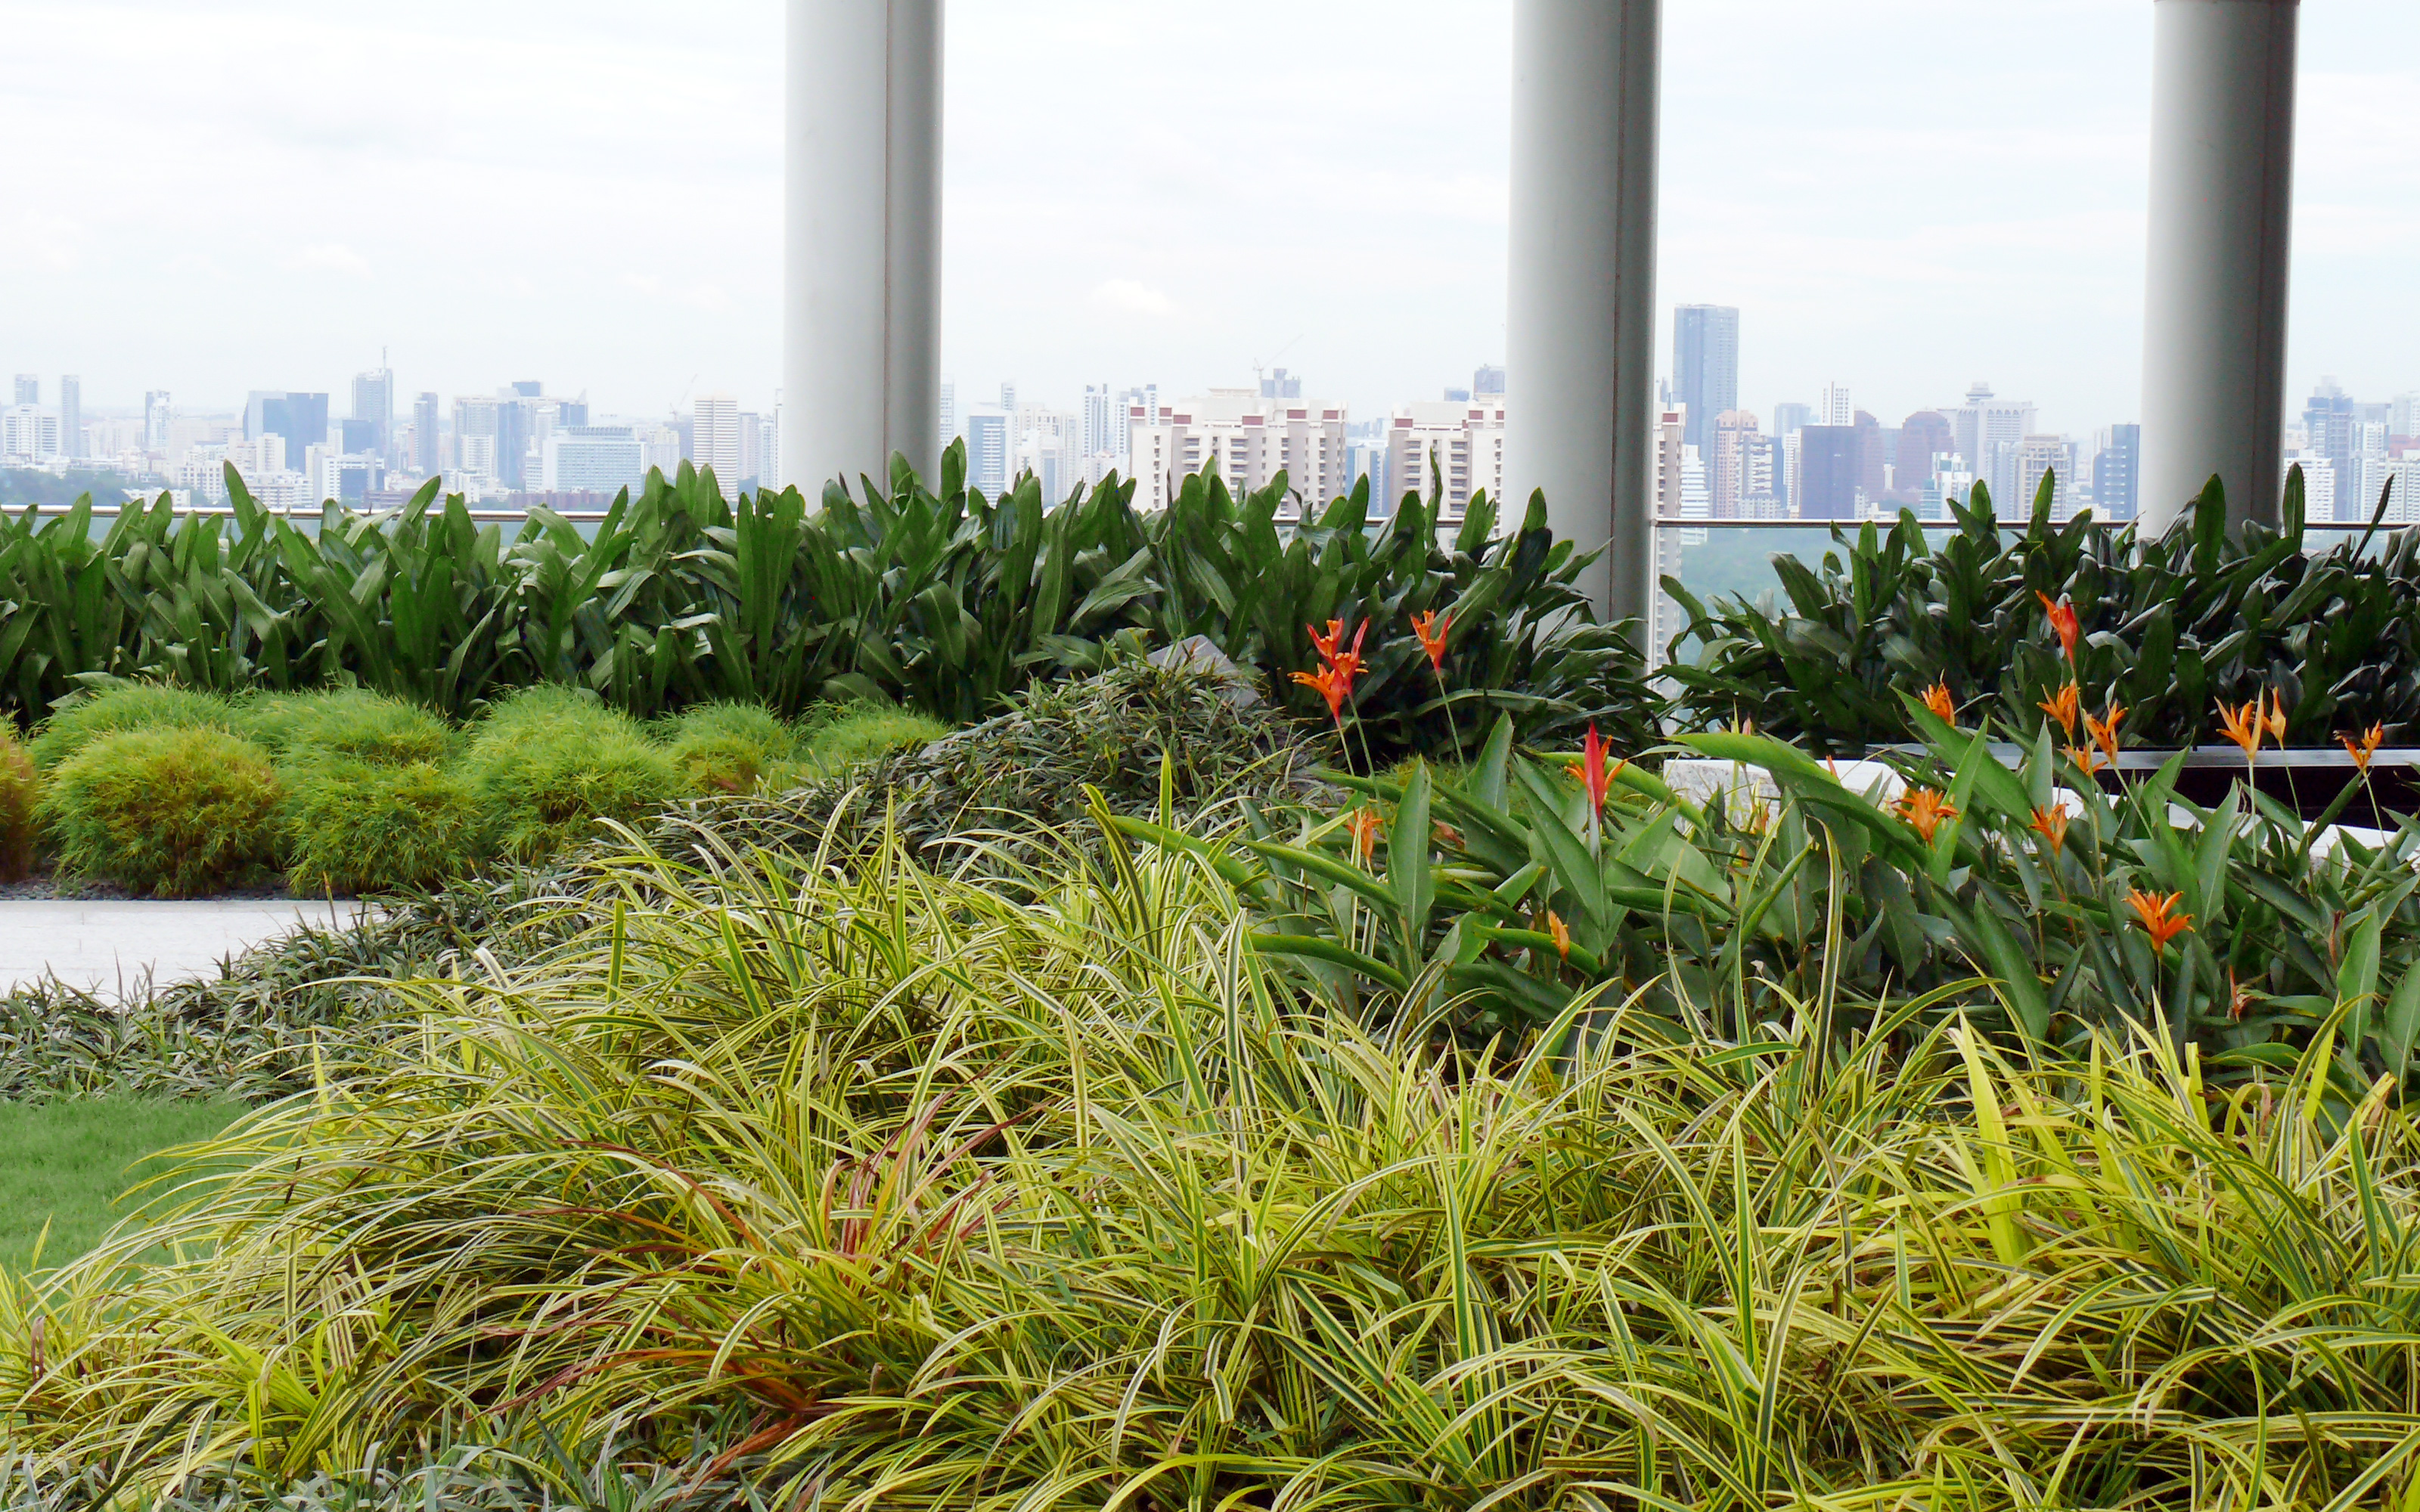 Roof garden with shrubs and small bushes